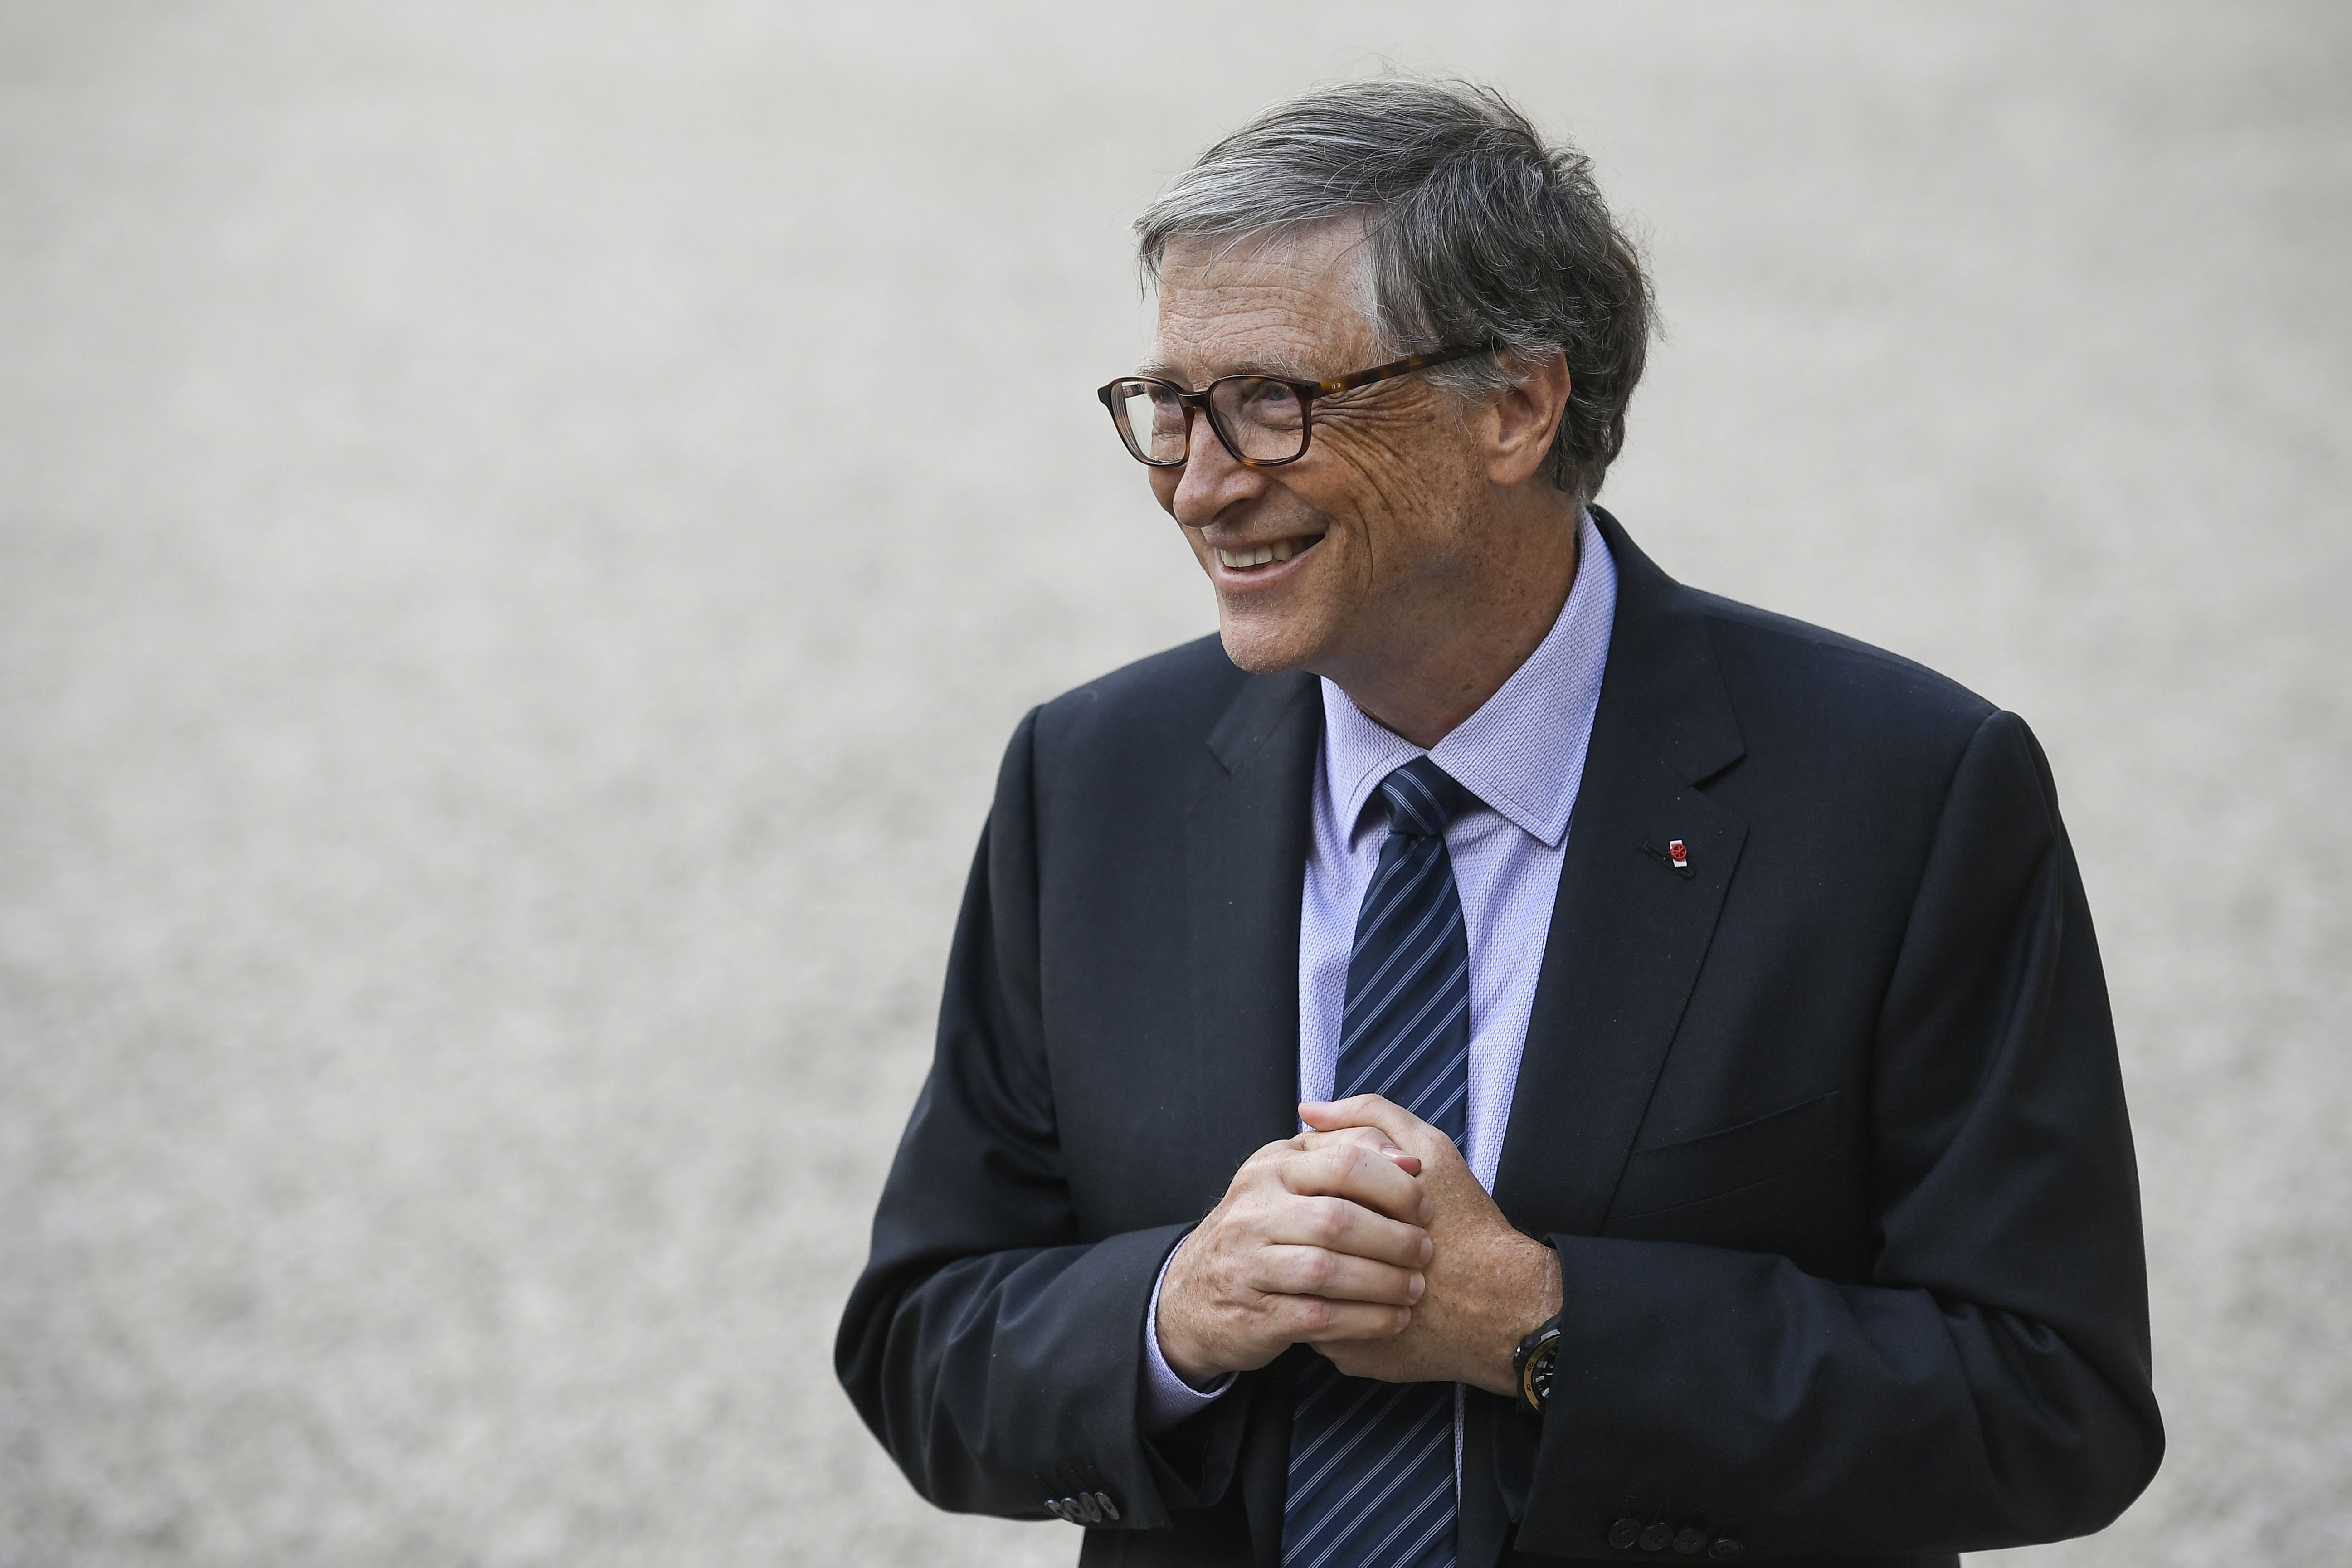 Microsoft's Bill Gates takes time out the office to go on 'Think Weeks'. Image: Lionel Bonaventure/AFP/Getty